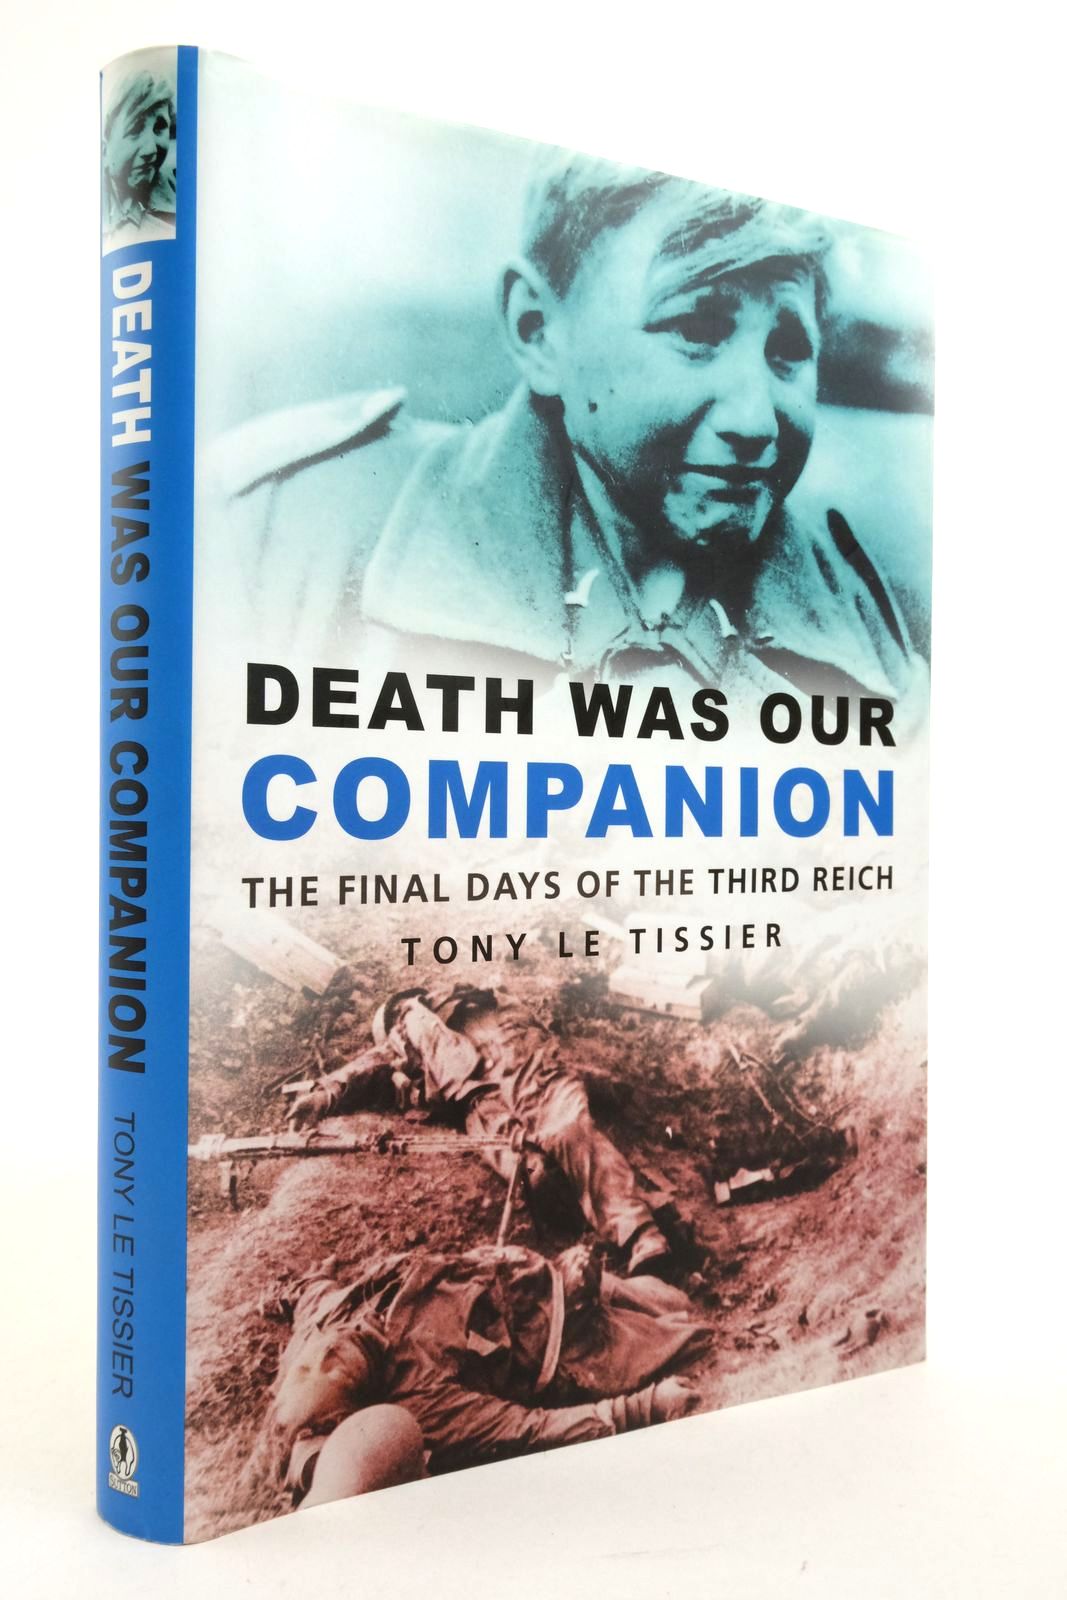 Photo of DEATH WAS OUR COMPANION: THE FINAL DAYS OF THE THIRD REICH written by Le Tissier, Tony published by Sutton Publishing (STOCK CODE: 2138384)  for sale by Stella & Rose's Books